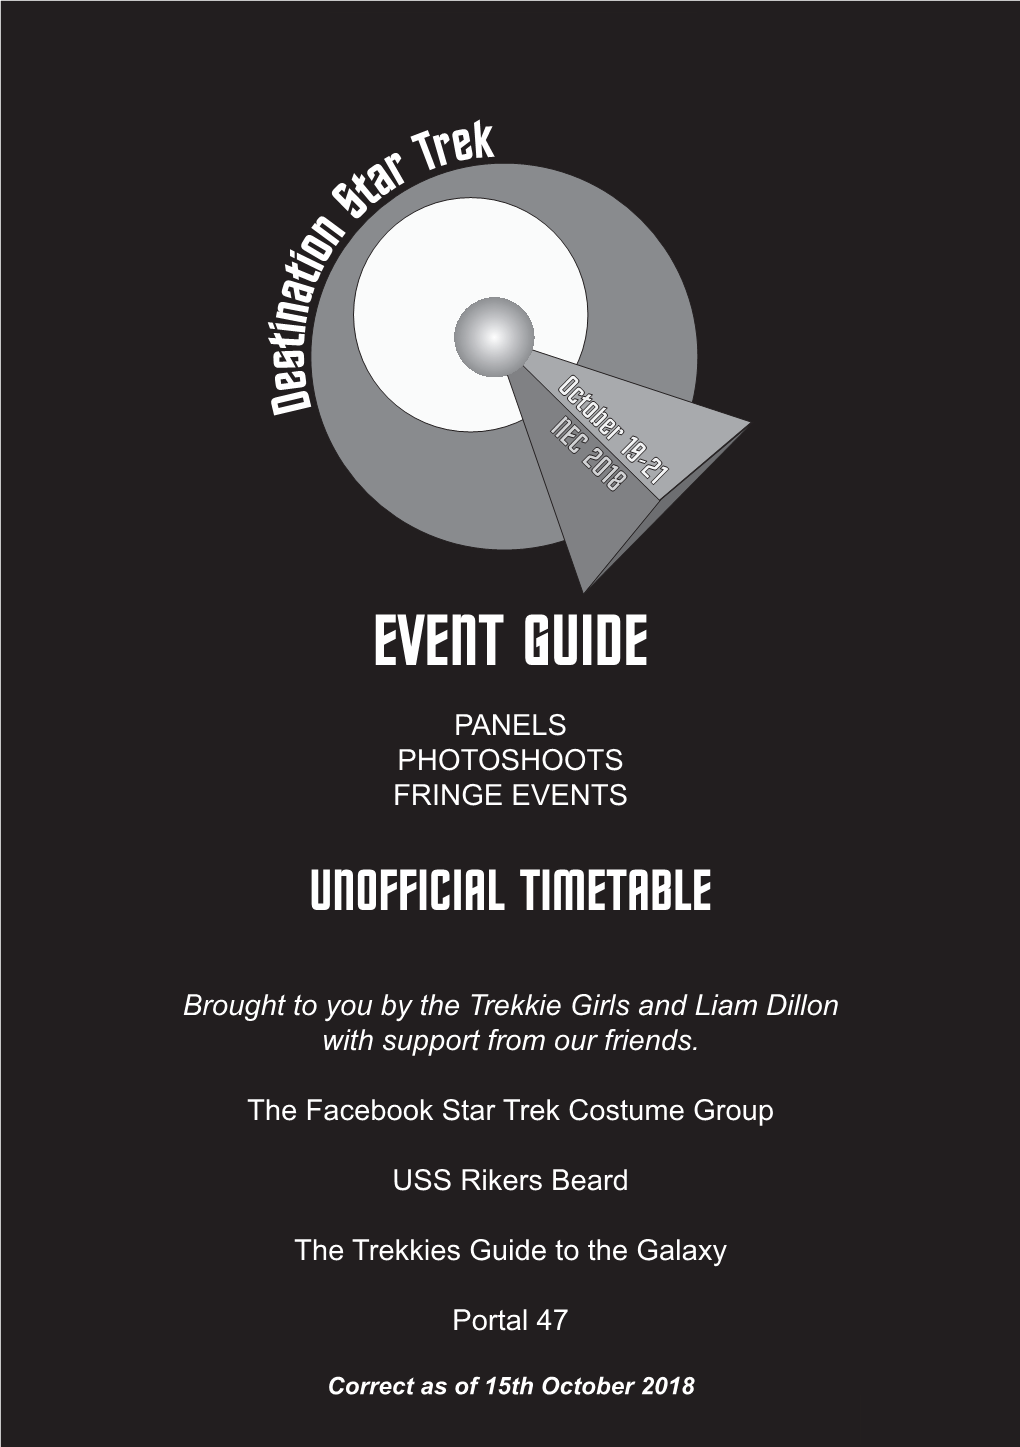 DST Unofficial Timetable